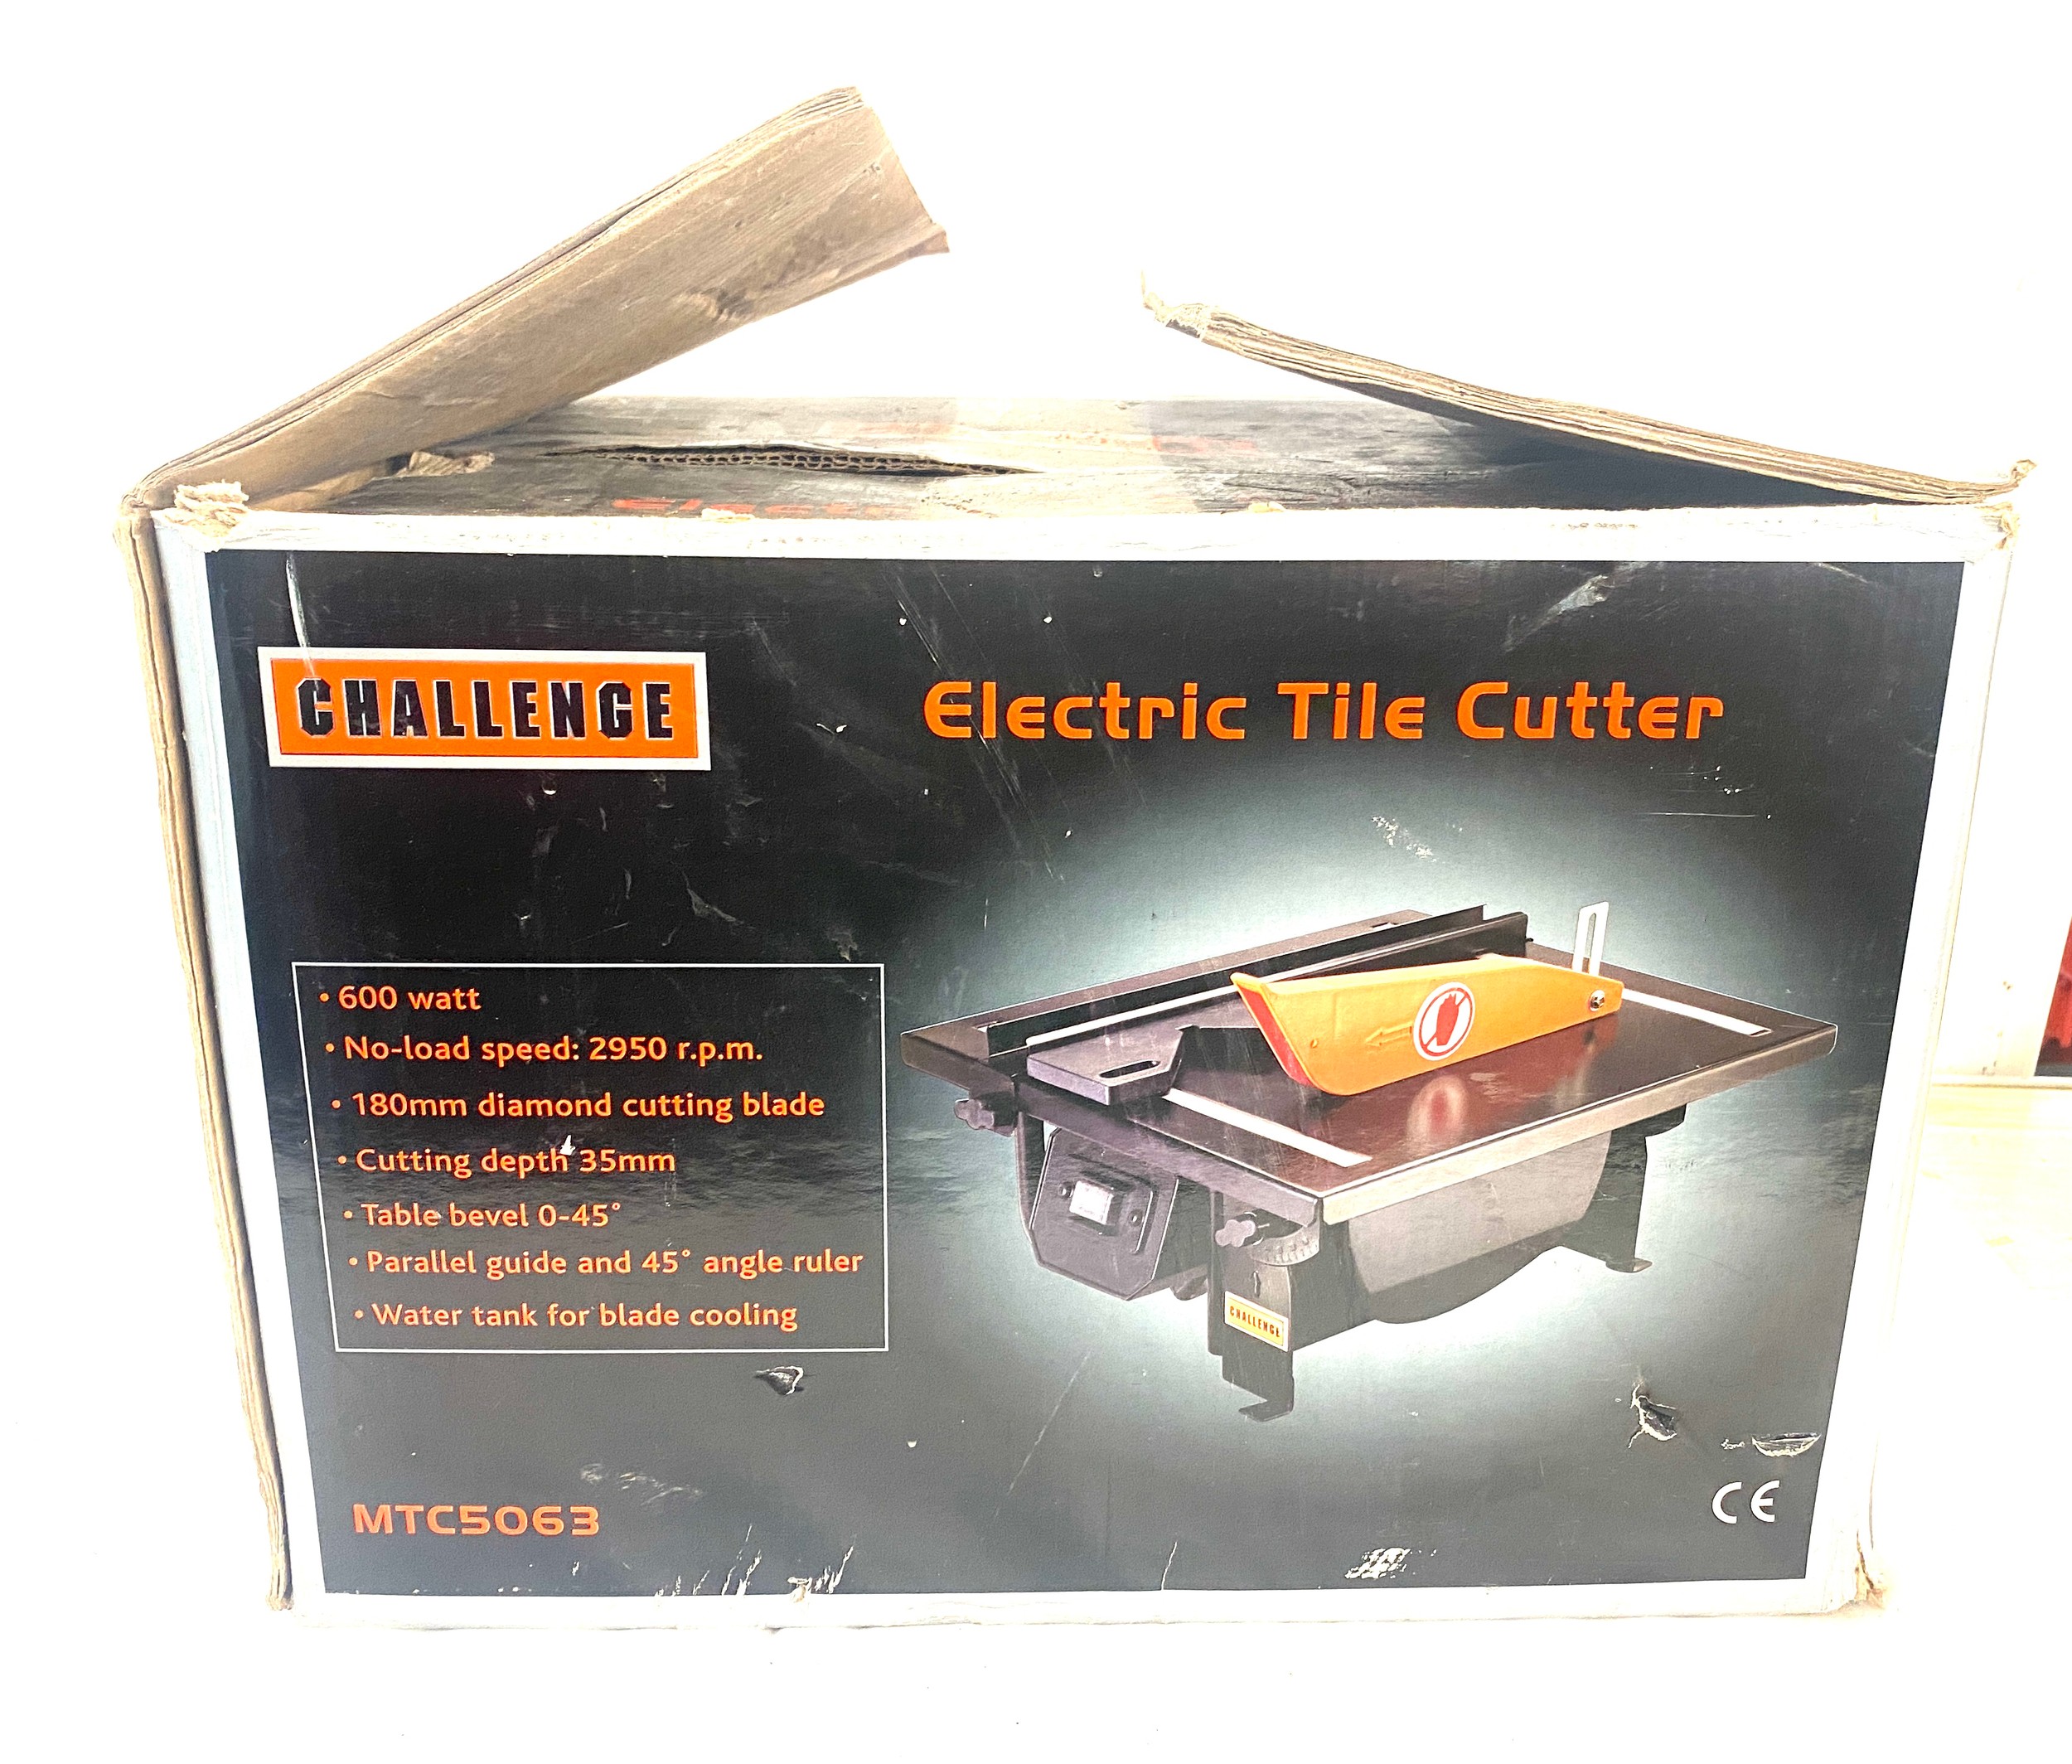 Challenge electric tile cutter serial MTC5O63, unteted